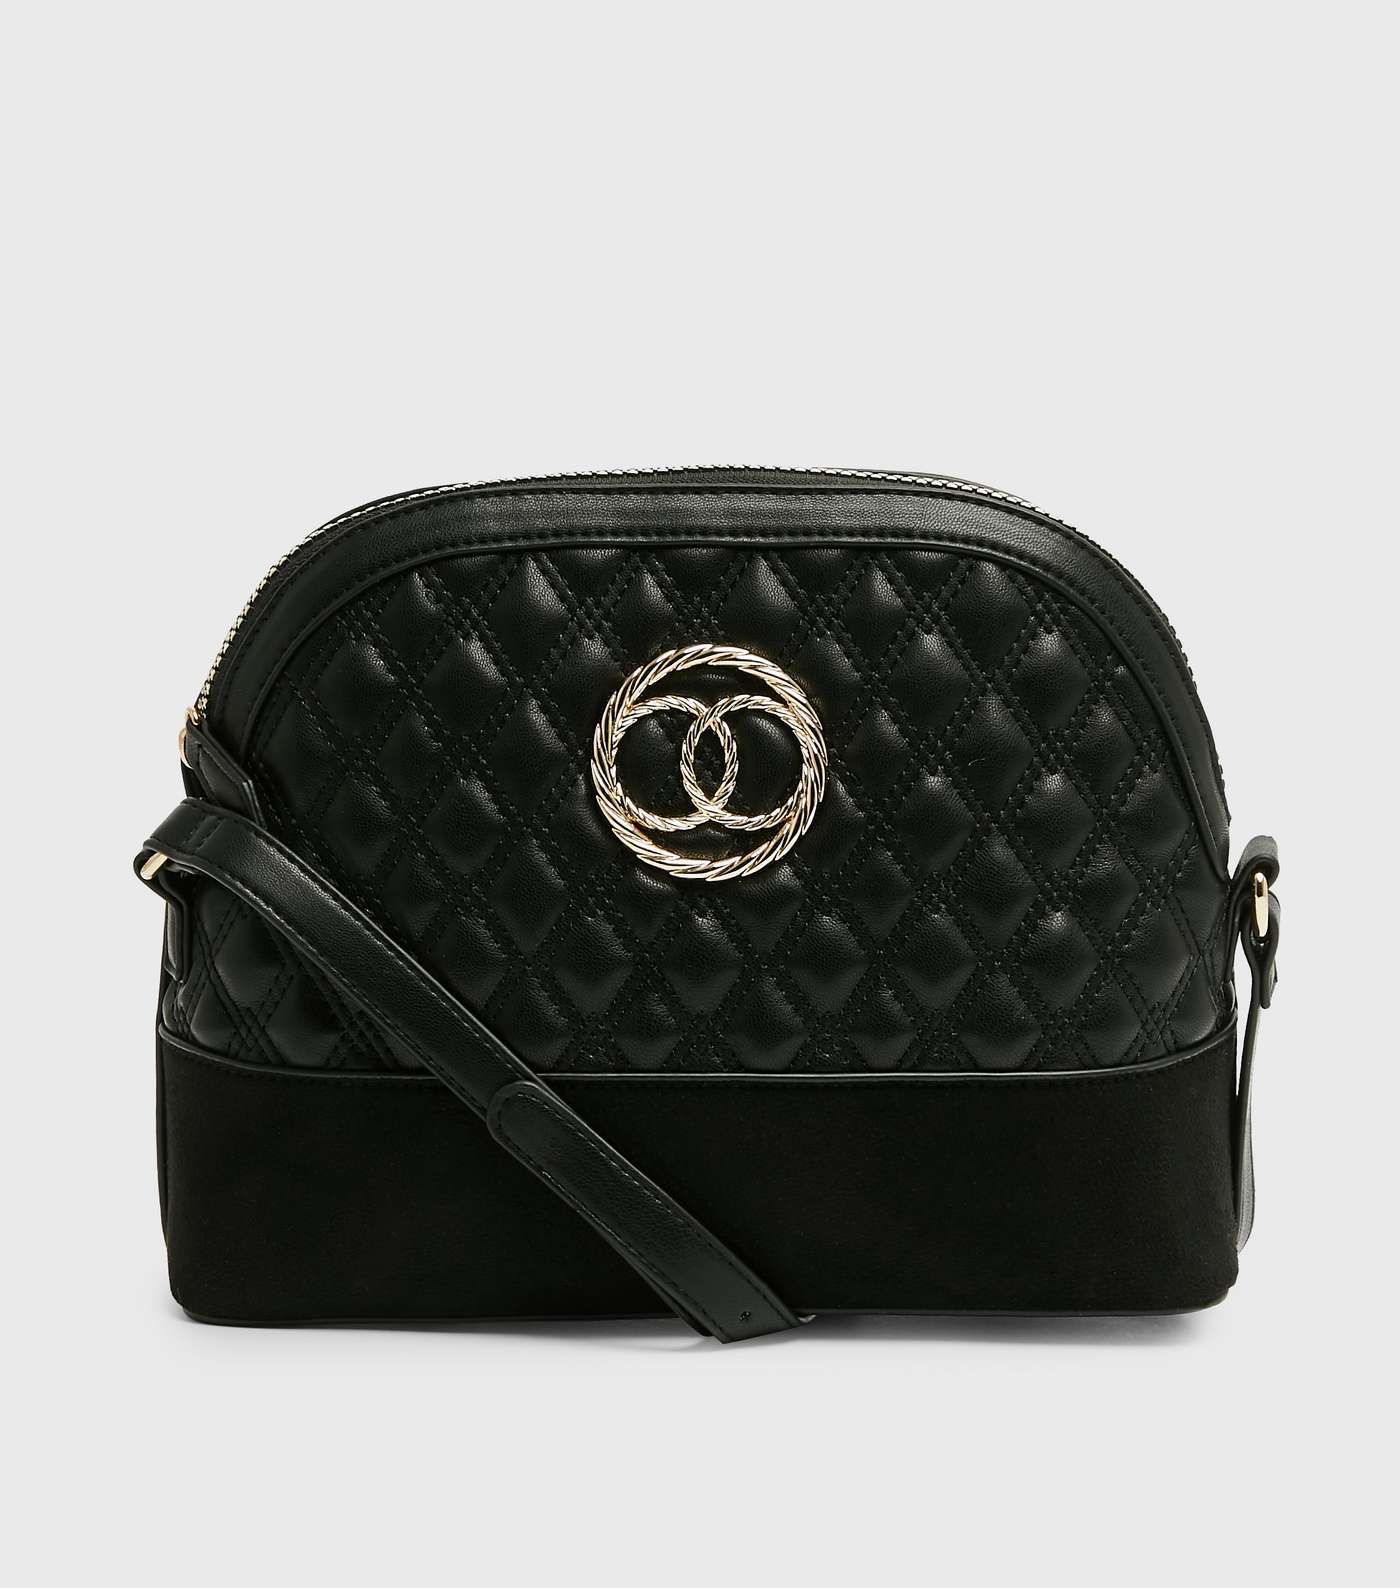 Black Quilted Leather-Look Ring Cross Body Bag